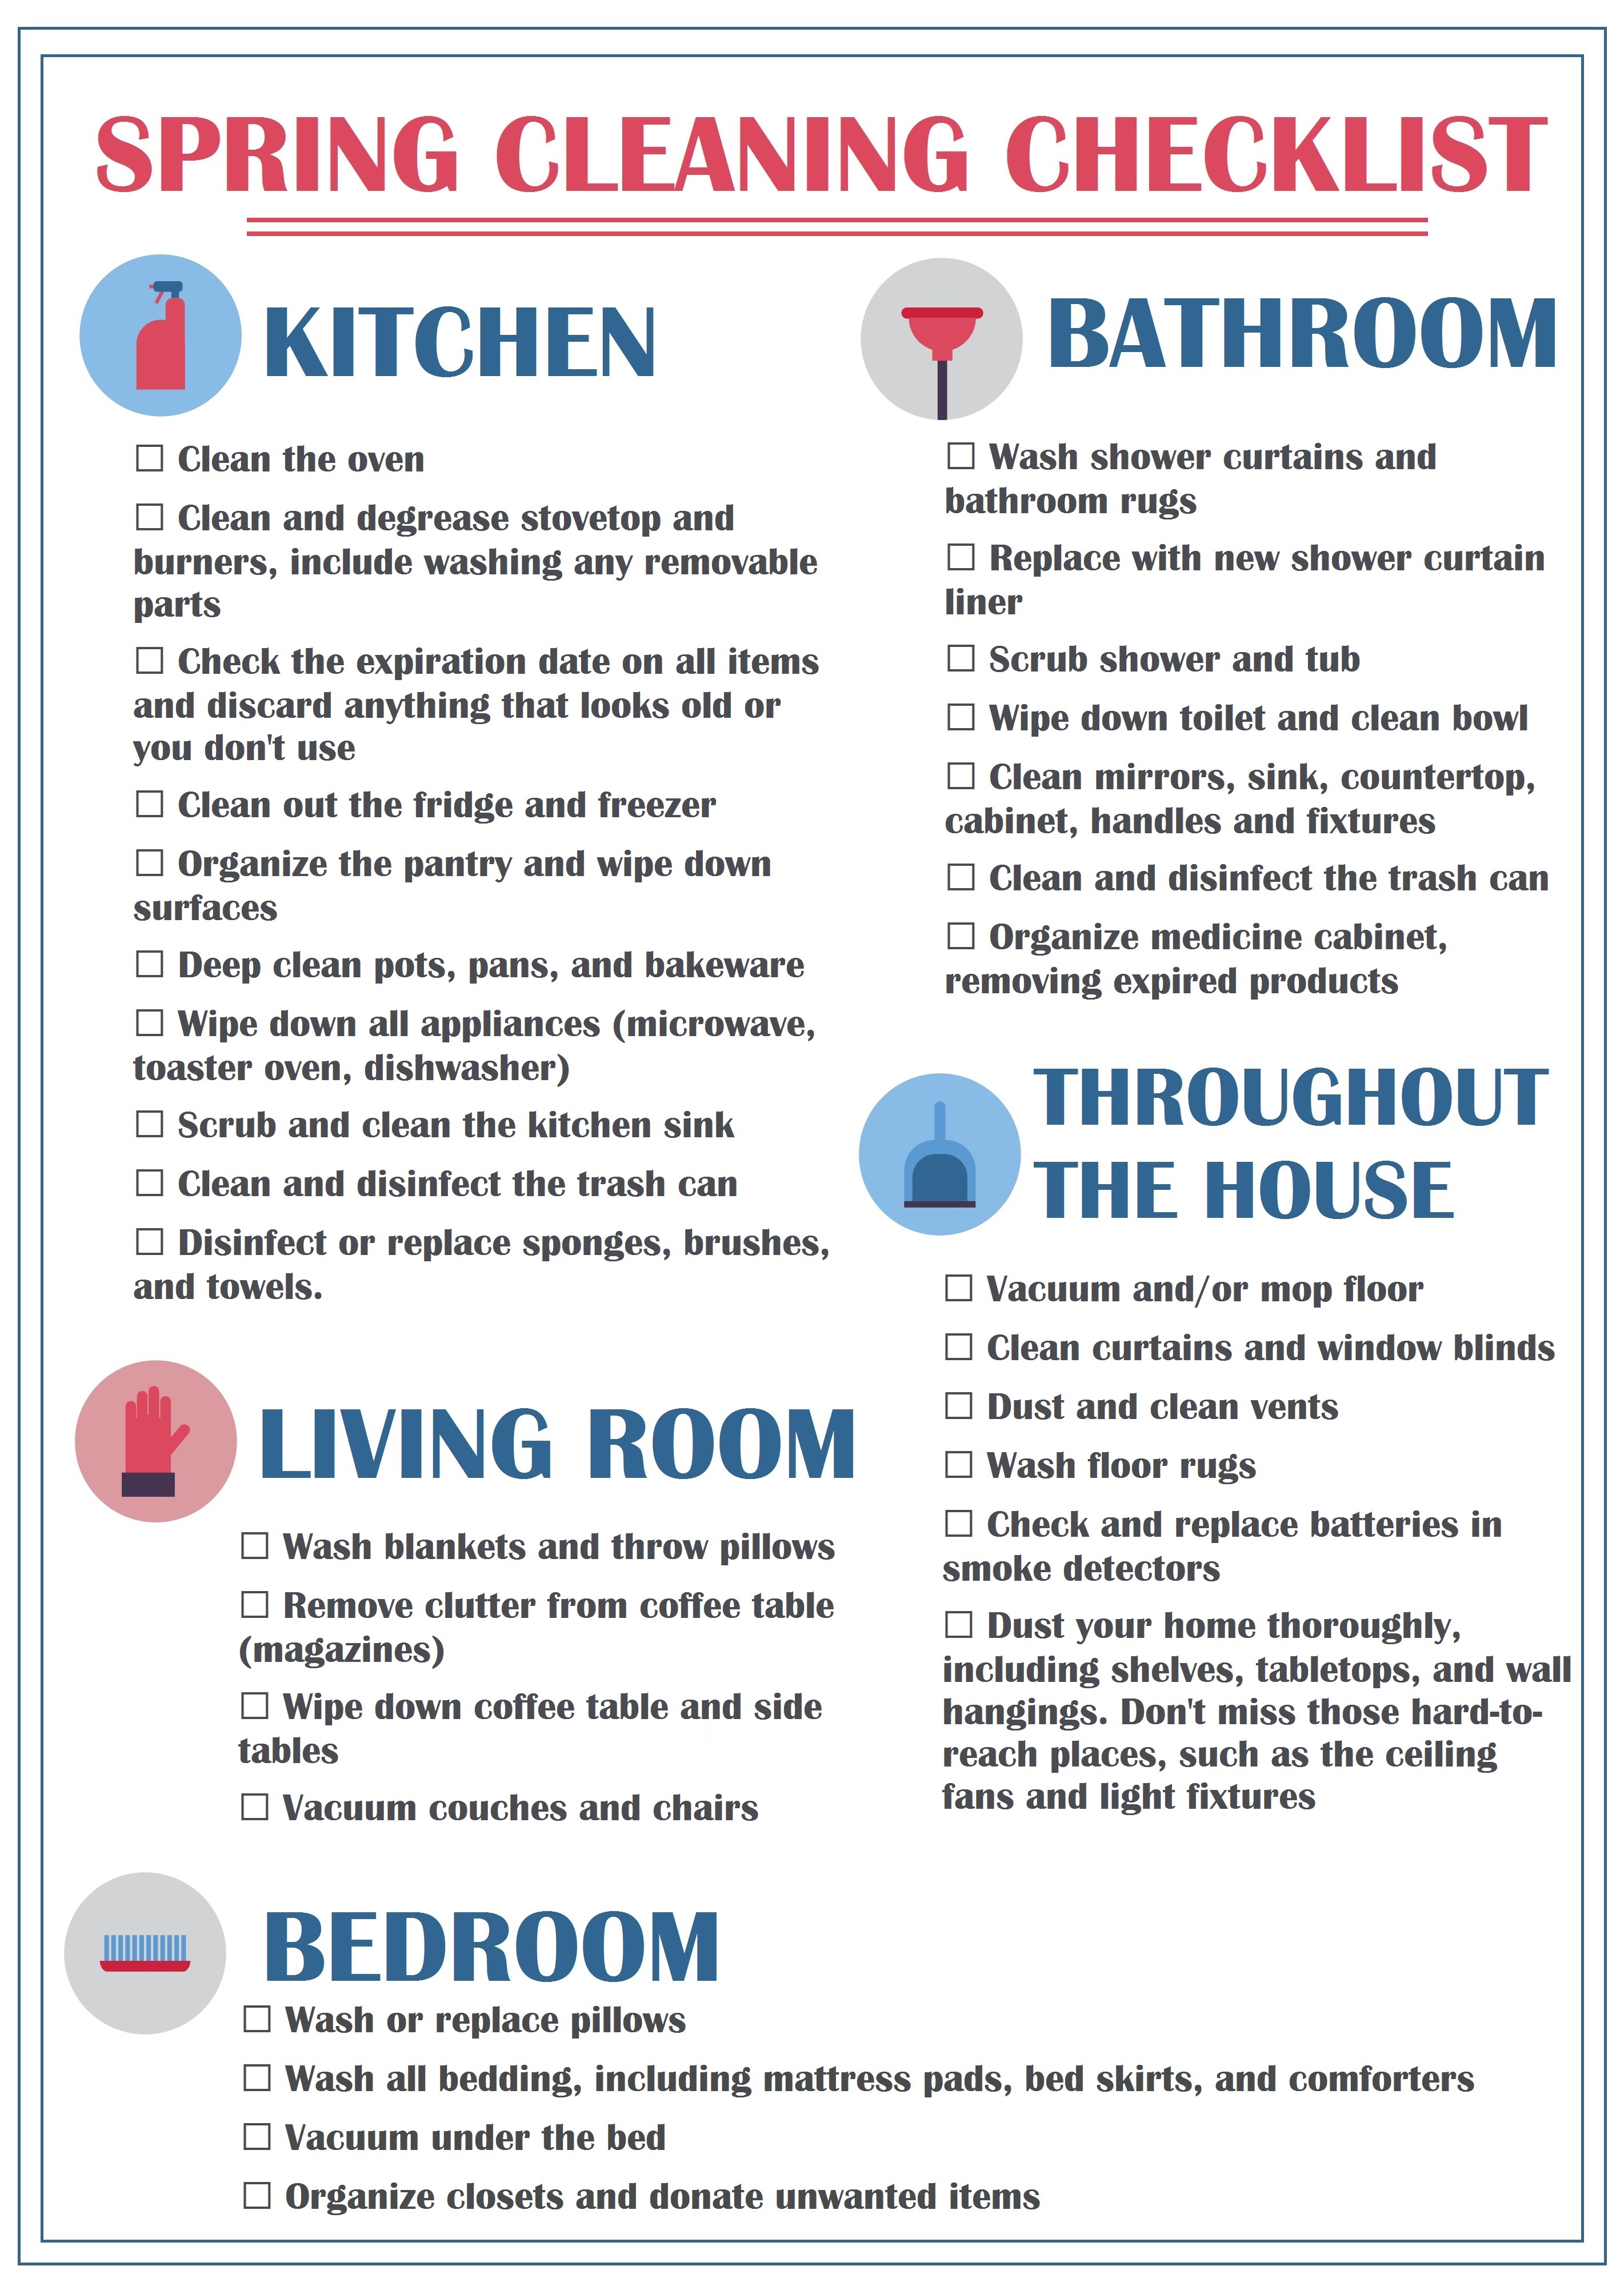 Bathroom Essentials Checklist - What to Buy For Your Home